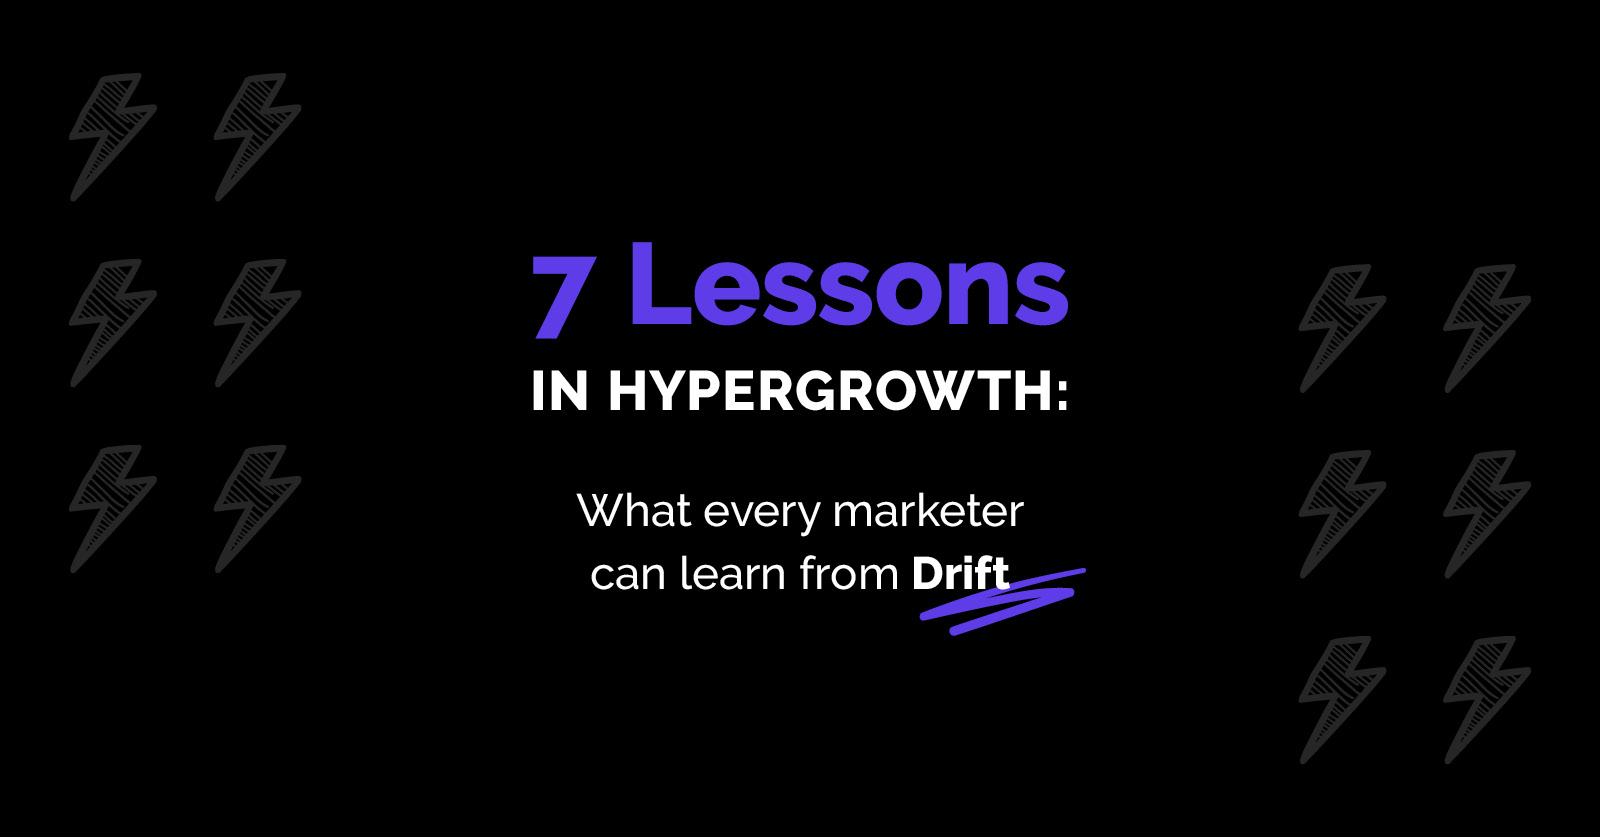 7 lessons in hypergrowth